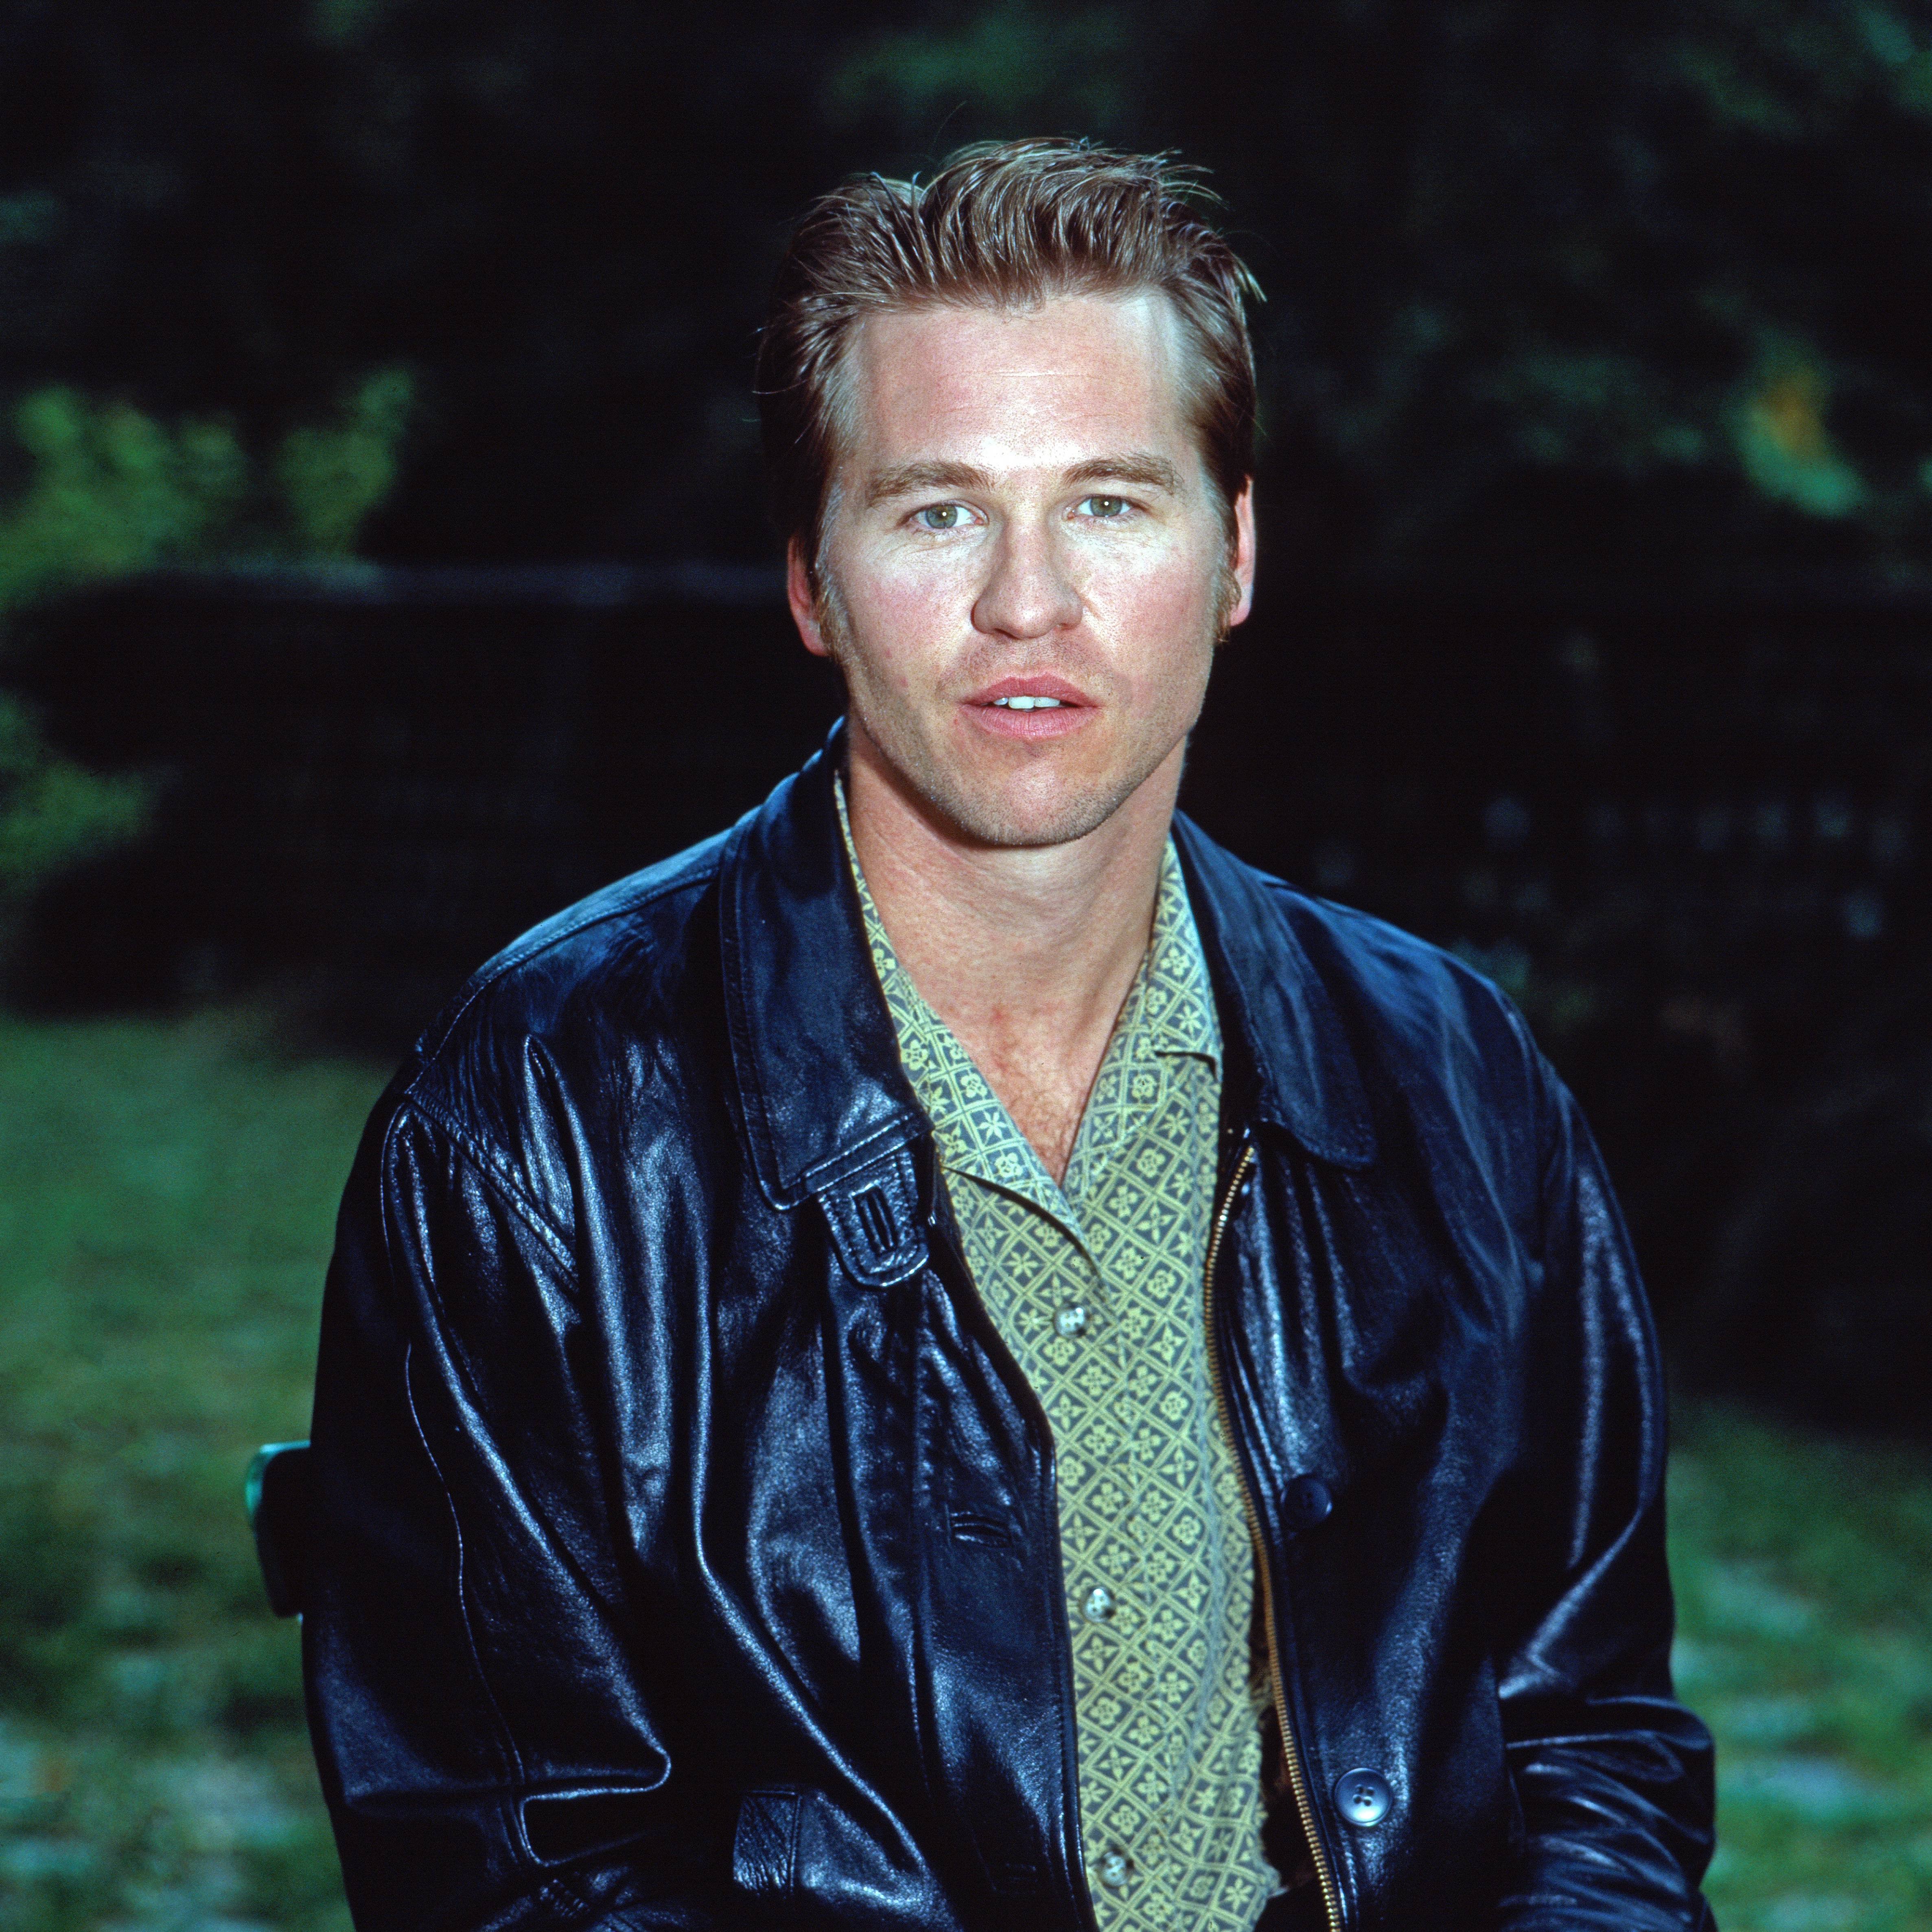 Val Kilmer during an outdoor interview at Munich, Germany in 1992. | Source: Getty Images